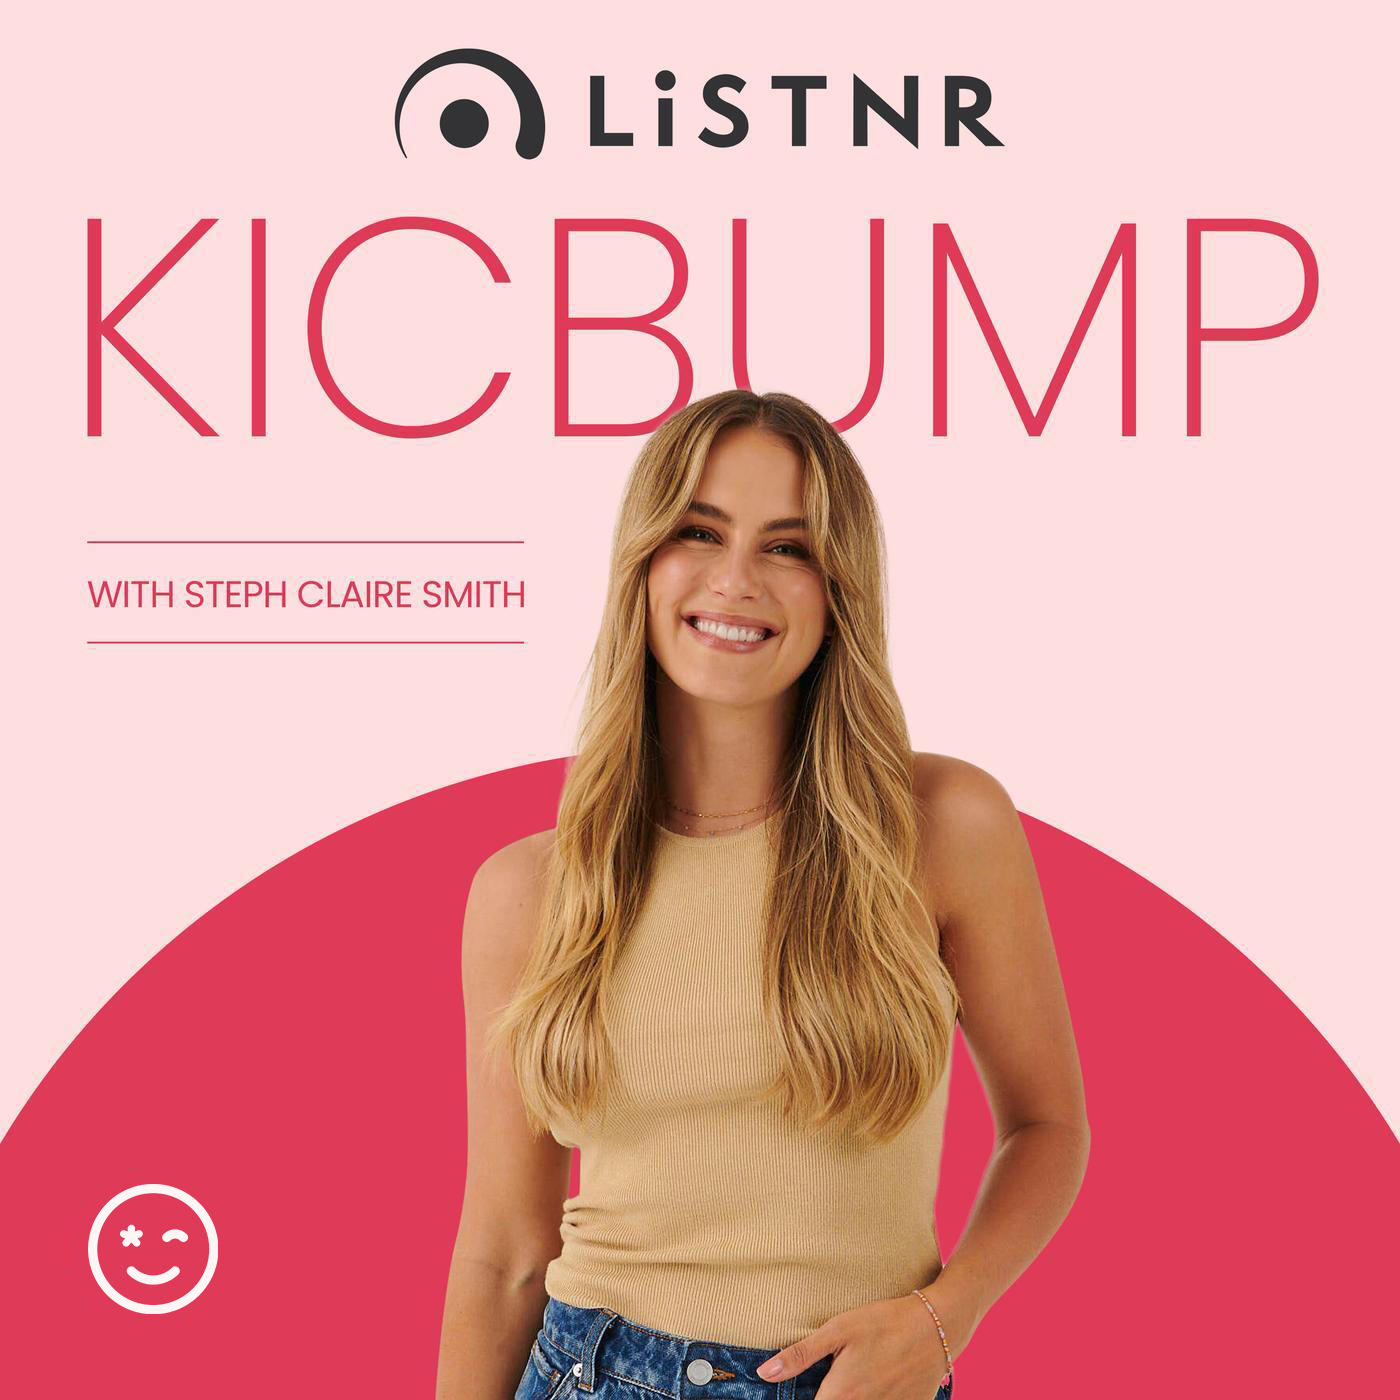 Do I or don’t I want kids? - KICBUMP with Laura Henshaw